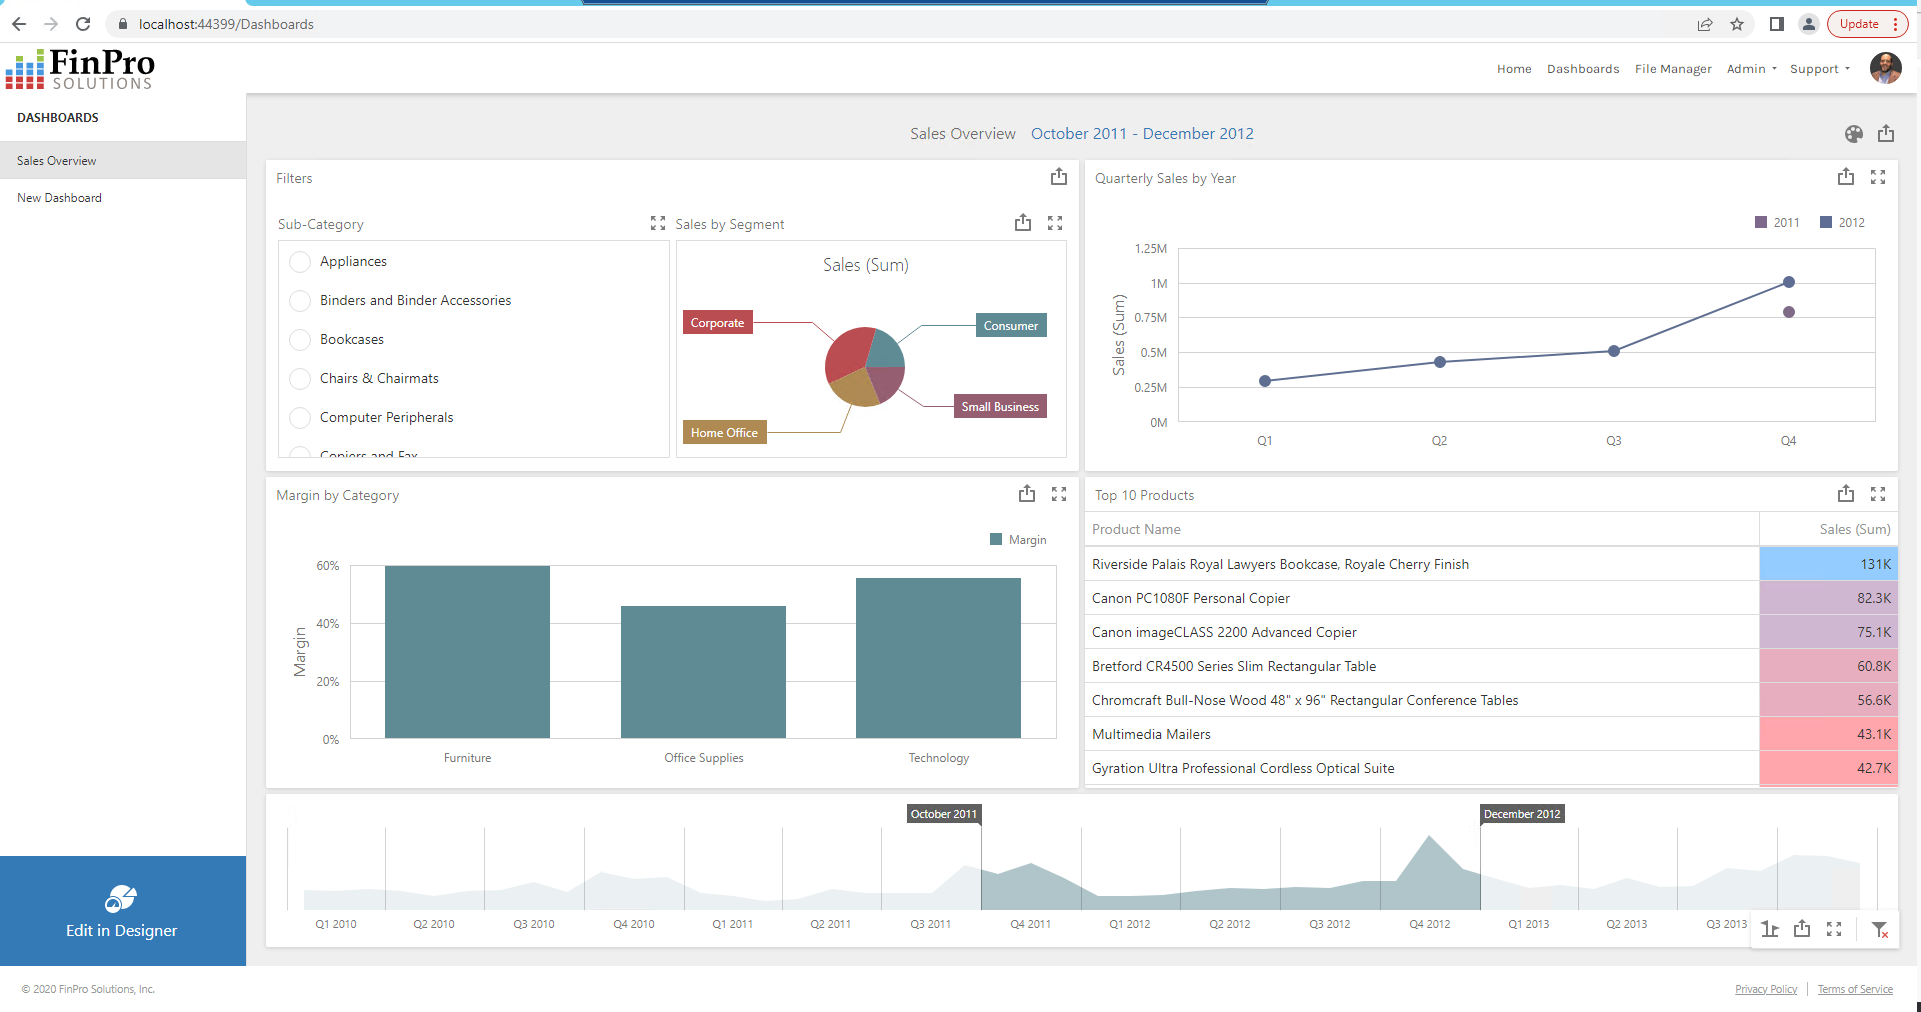 Powerful web-based dashboarding and reporting